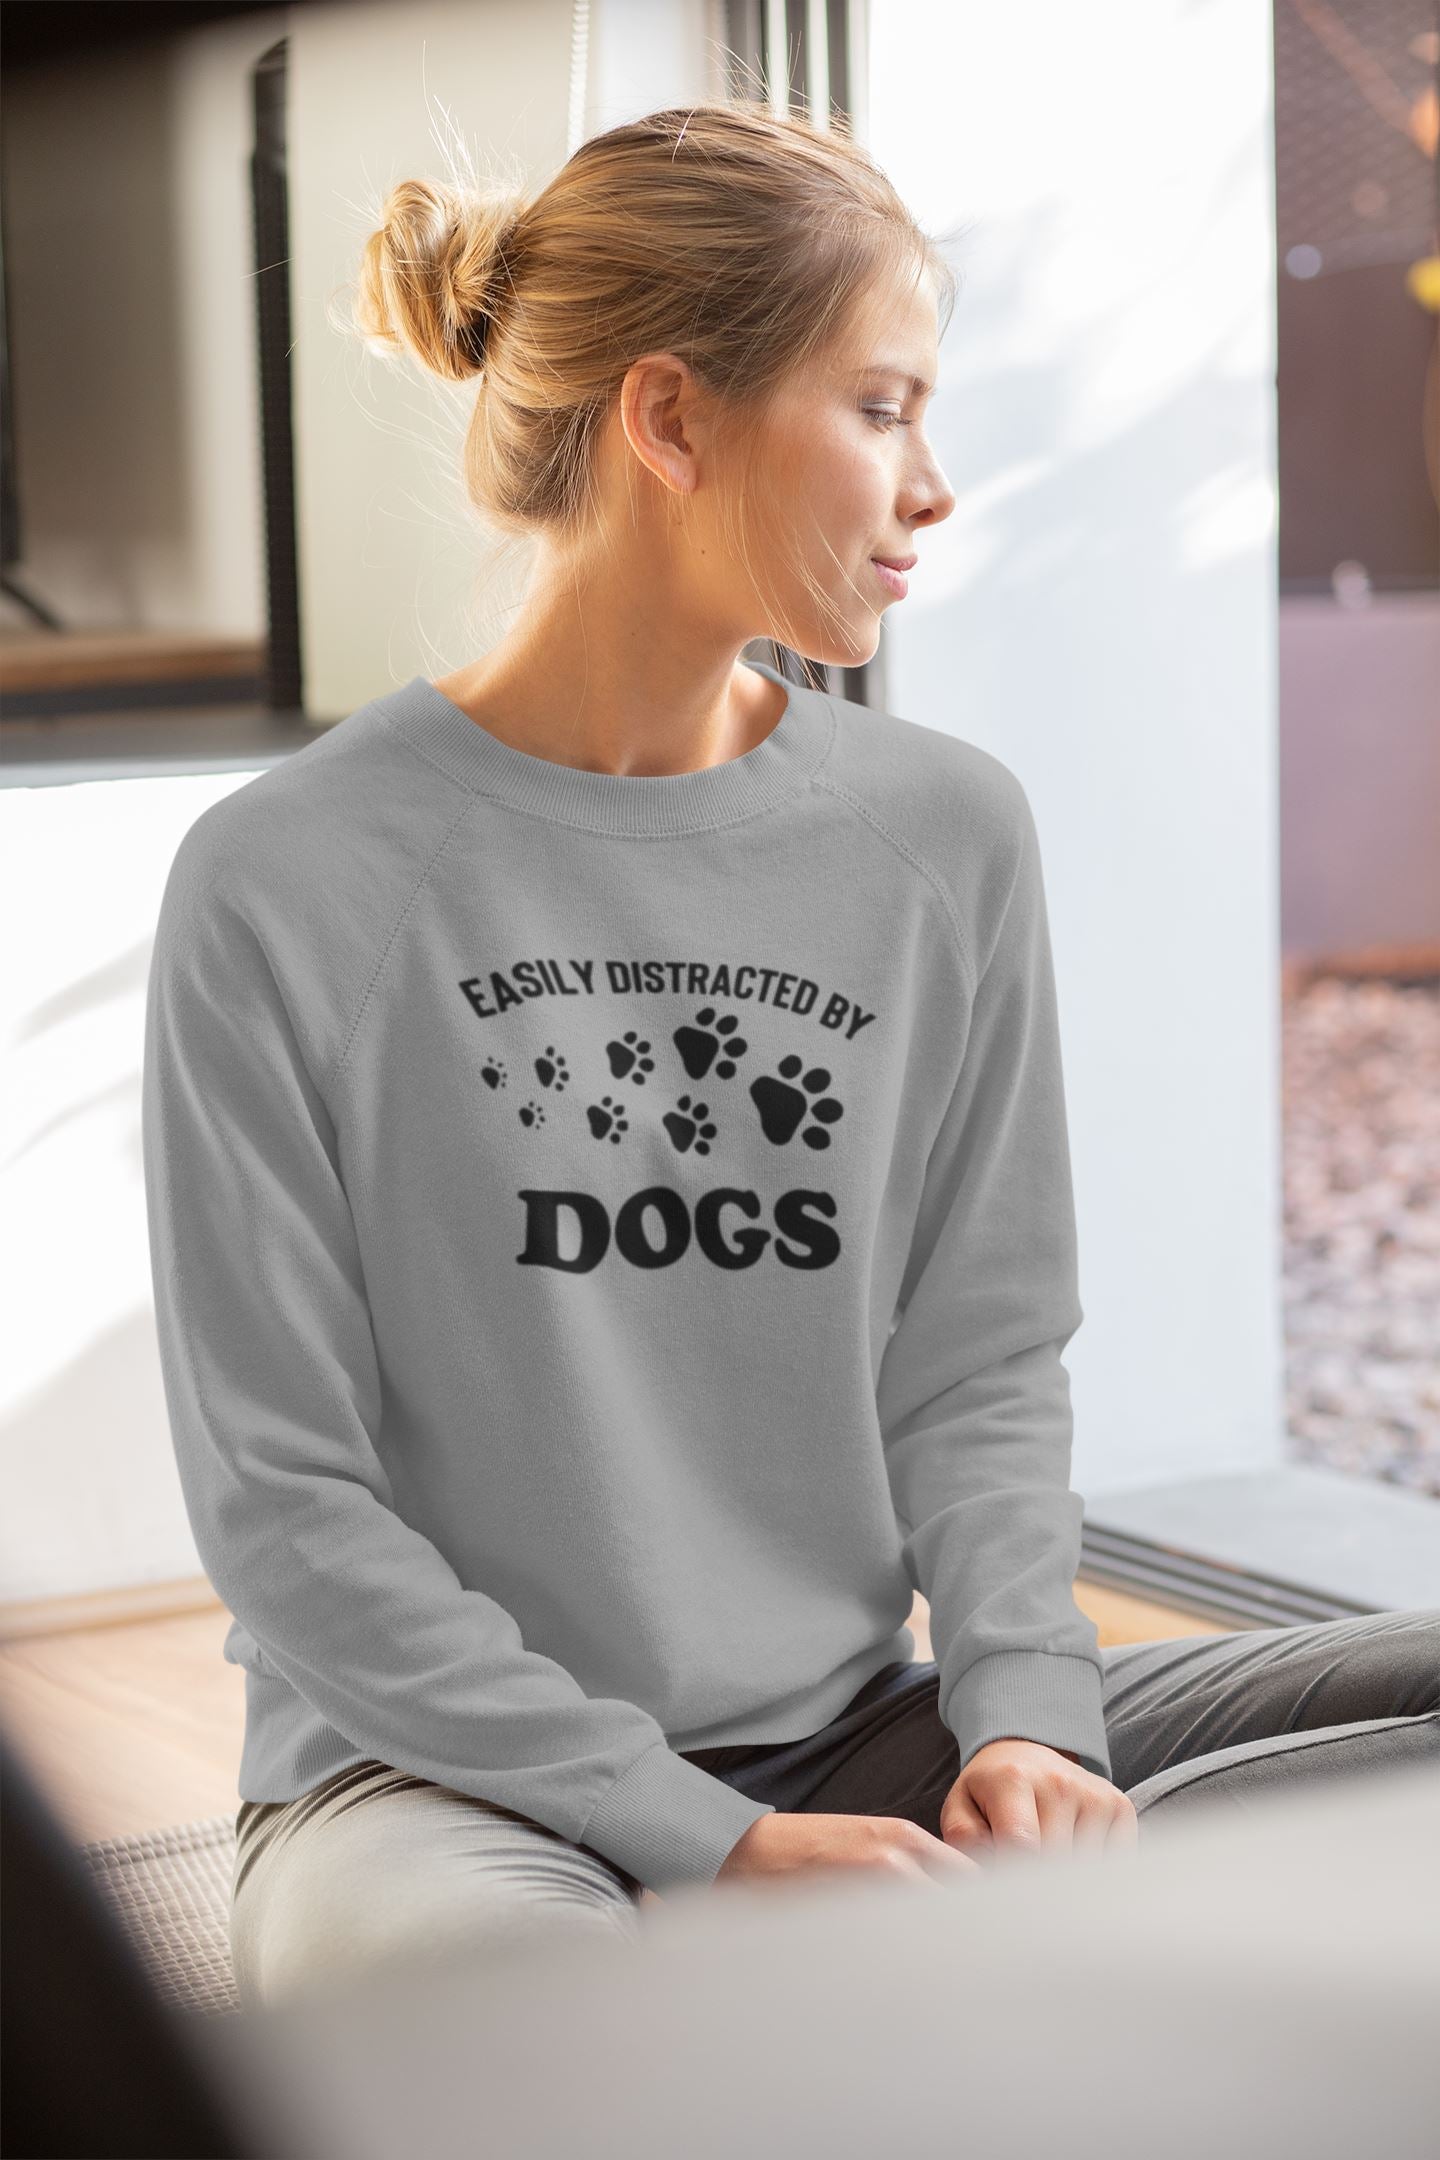 Easily Distracted by Dogs Sweatshirt